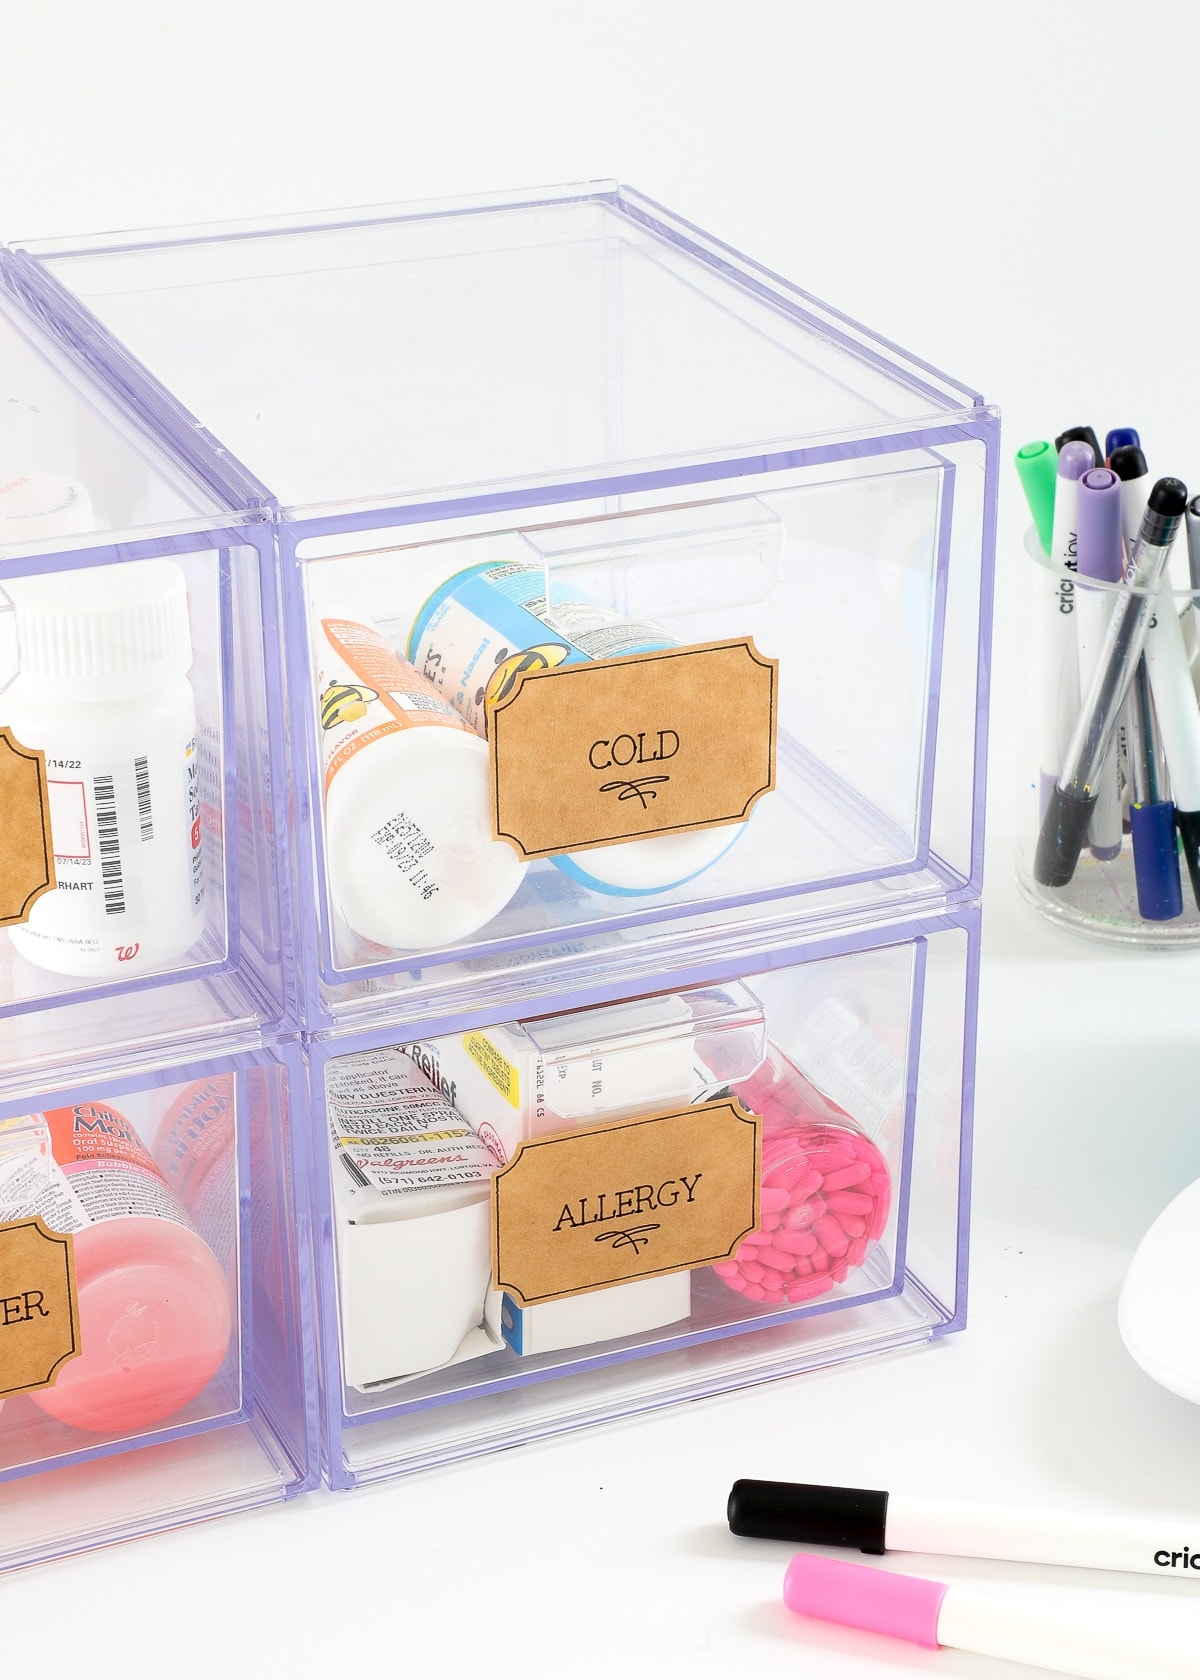 Labels drawn with Cricut Pens on stacking acrylic drawers holding medicine